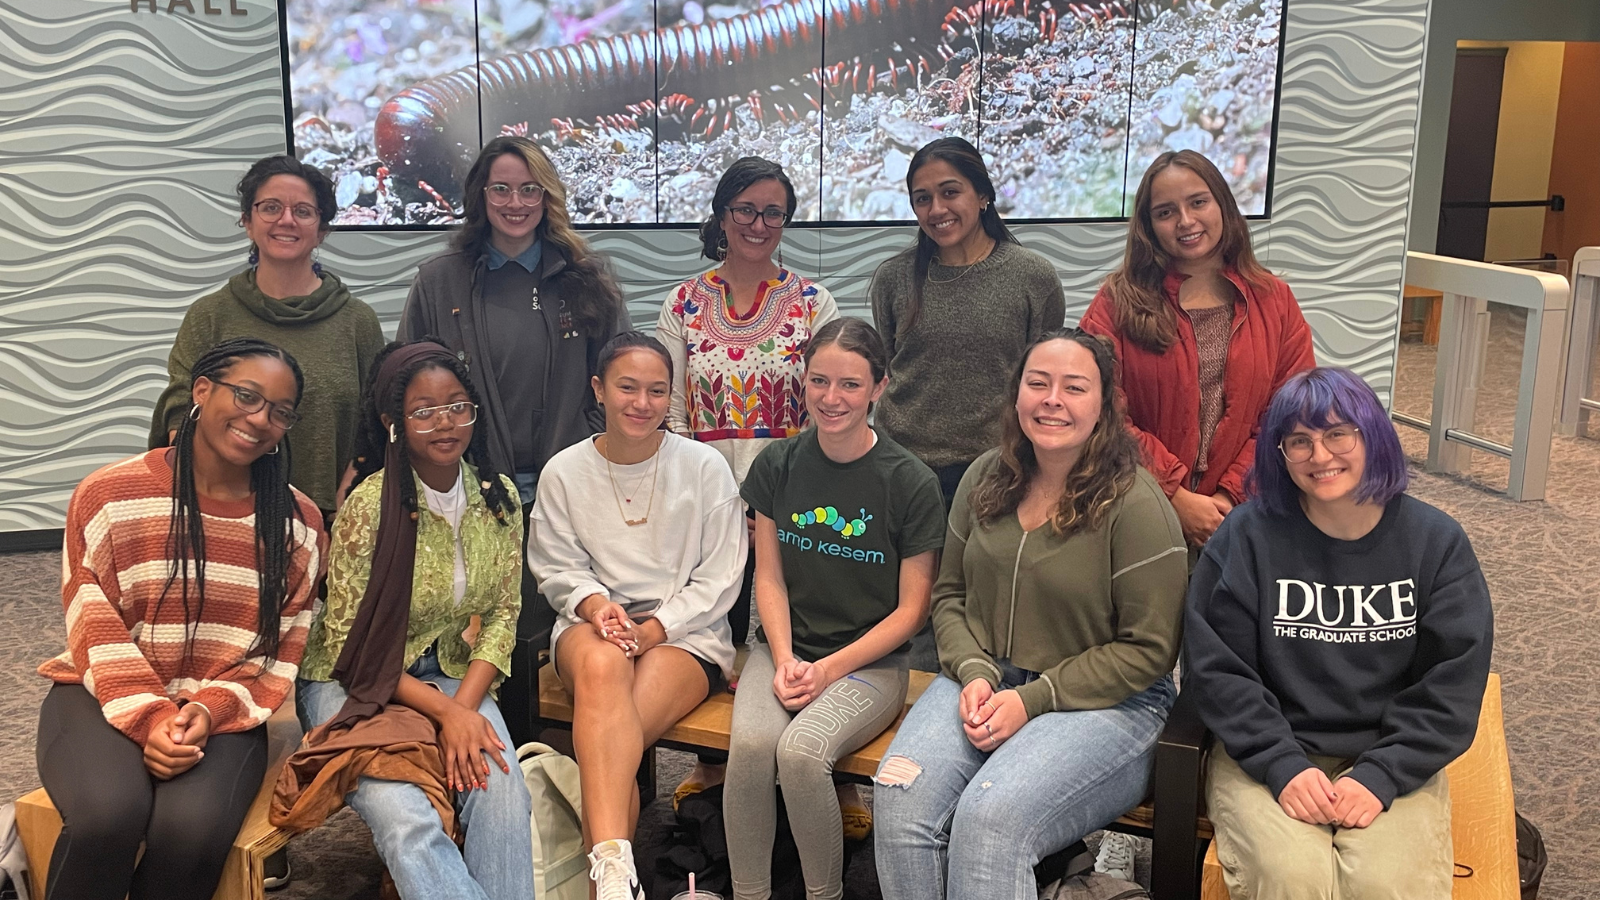 Members of the Increasing Children’s Sense of Belonging in STEM Fields team at the Museum of Life and Science. Back row L to R: Tamar Kushnir, Peregrine Bratschi, Sarah Gaither, Janvi Kavathia, Mercedes Muñoz. Front row, L to R: Maria Brown, LaNaiah Frieson, Charli Cordoves, Carly Blank, Dena Silver, Jessa Stegall. (Photos: Courtesy of the Increasing Children’s Sense of Belonging in STEM Fields team)